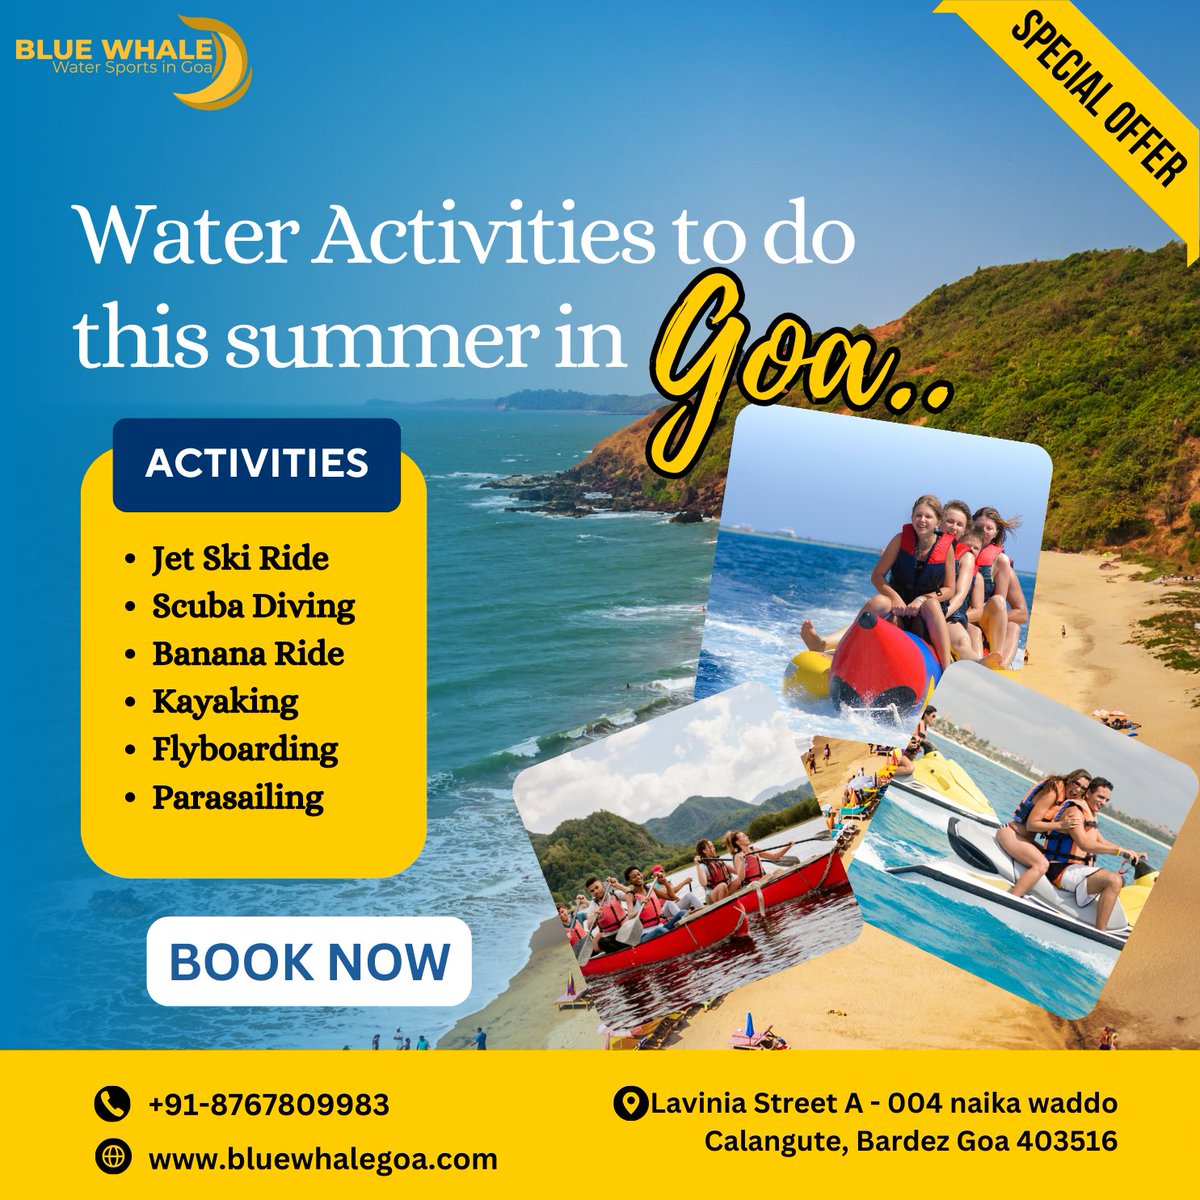 Dive into adventure with Blue Whale Goa! Jet skiing, paddleboarding, parasailing, and more! Book now at +91 8767809983 or bit.ly/45YtZyh 🌊 #BlueWhaleGoa #WaterSports #Adventure